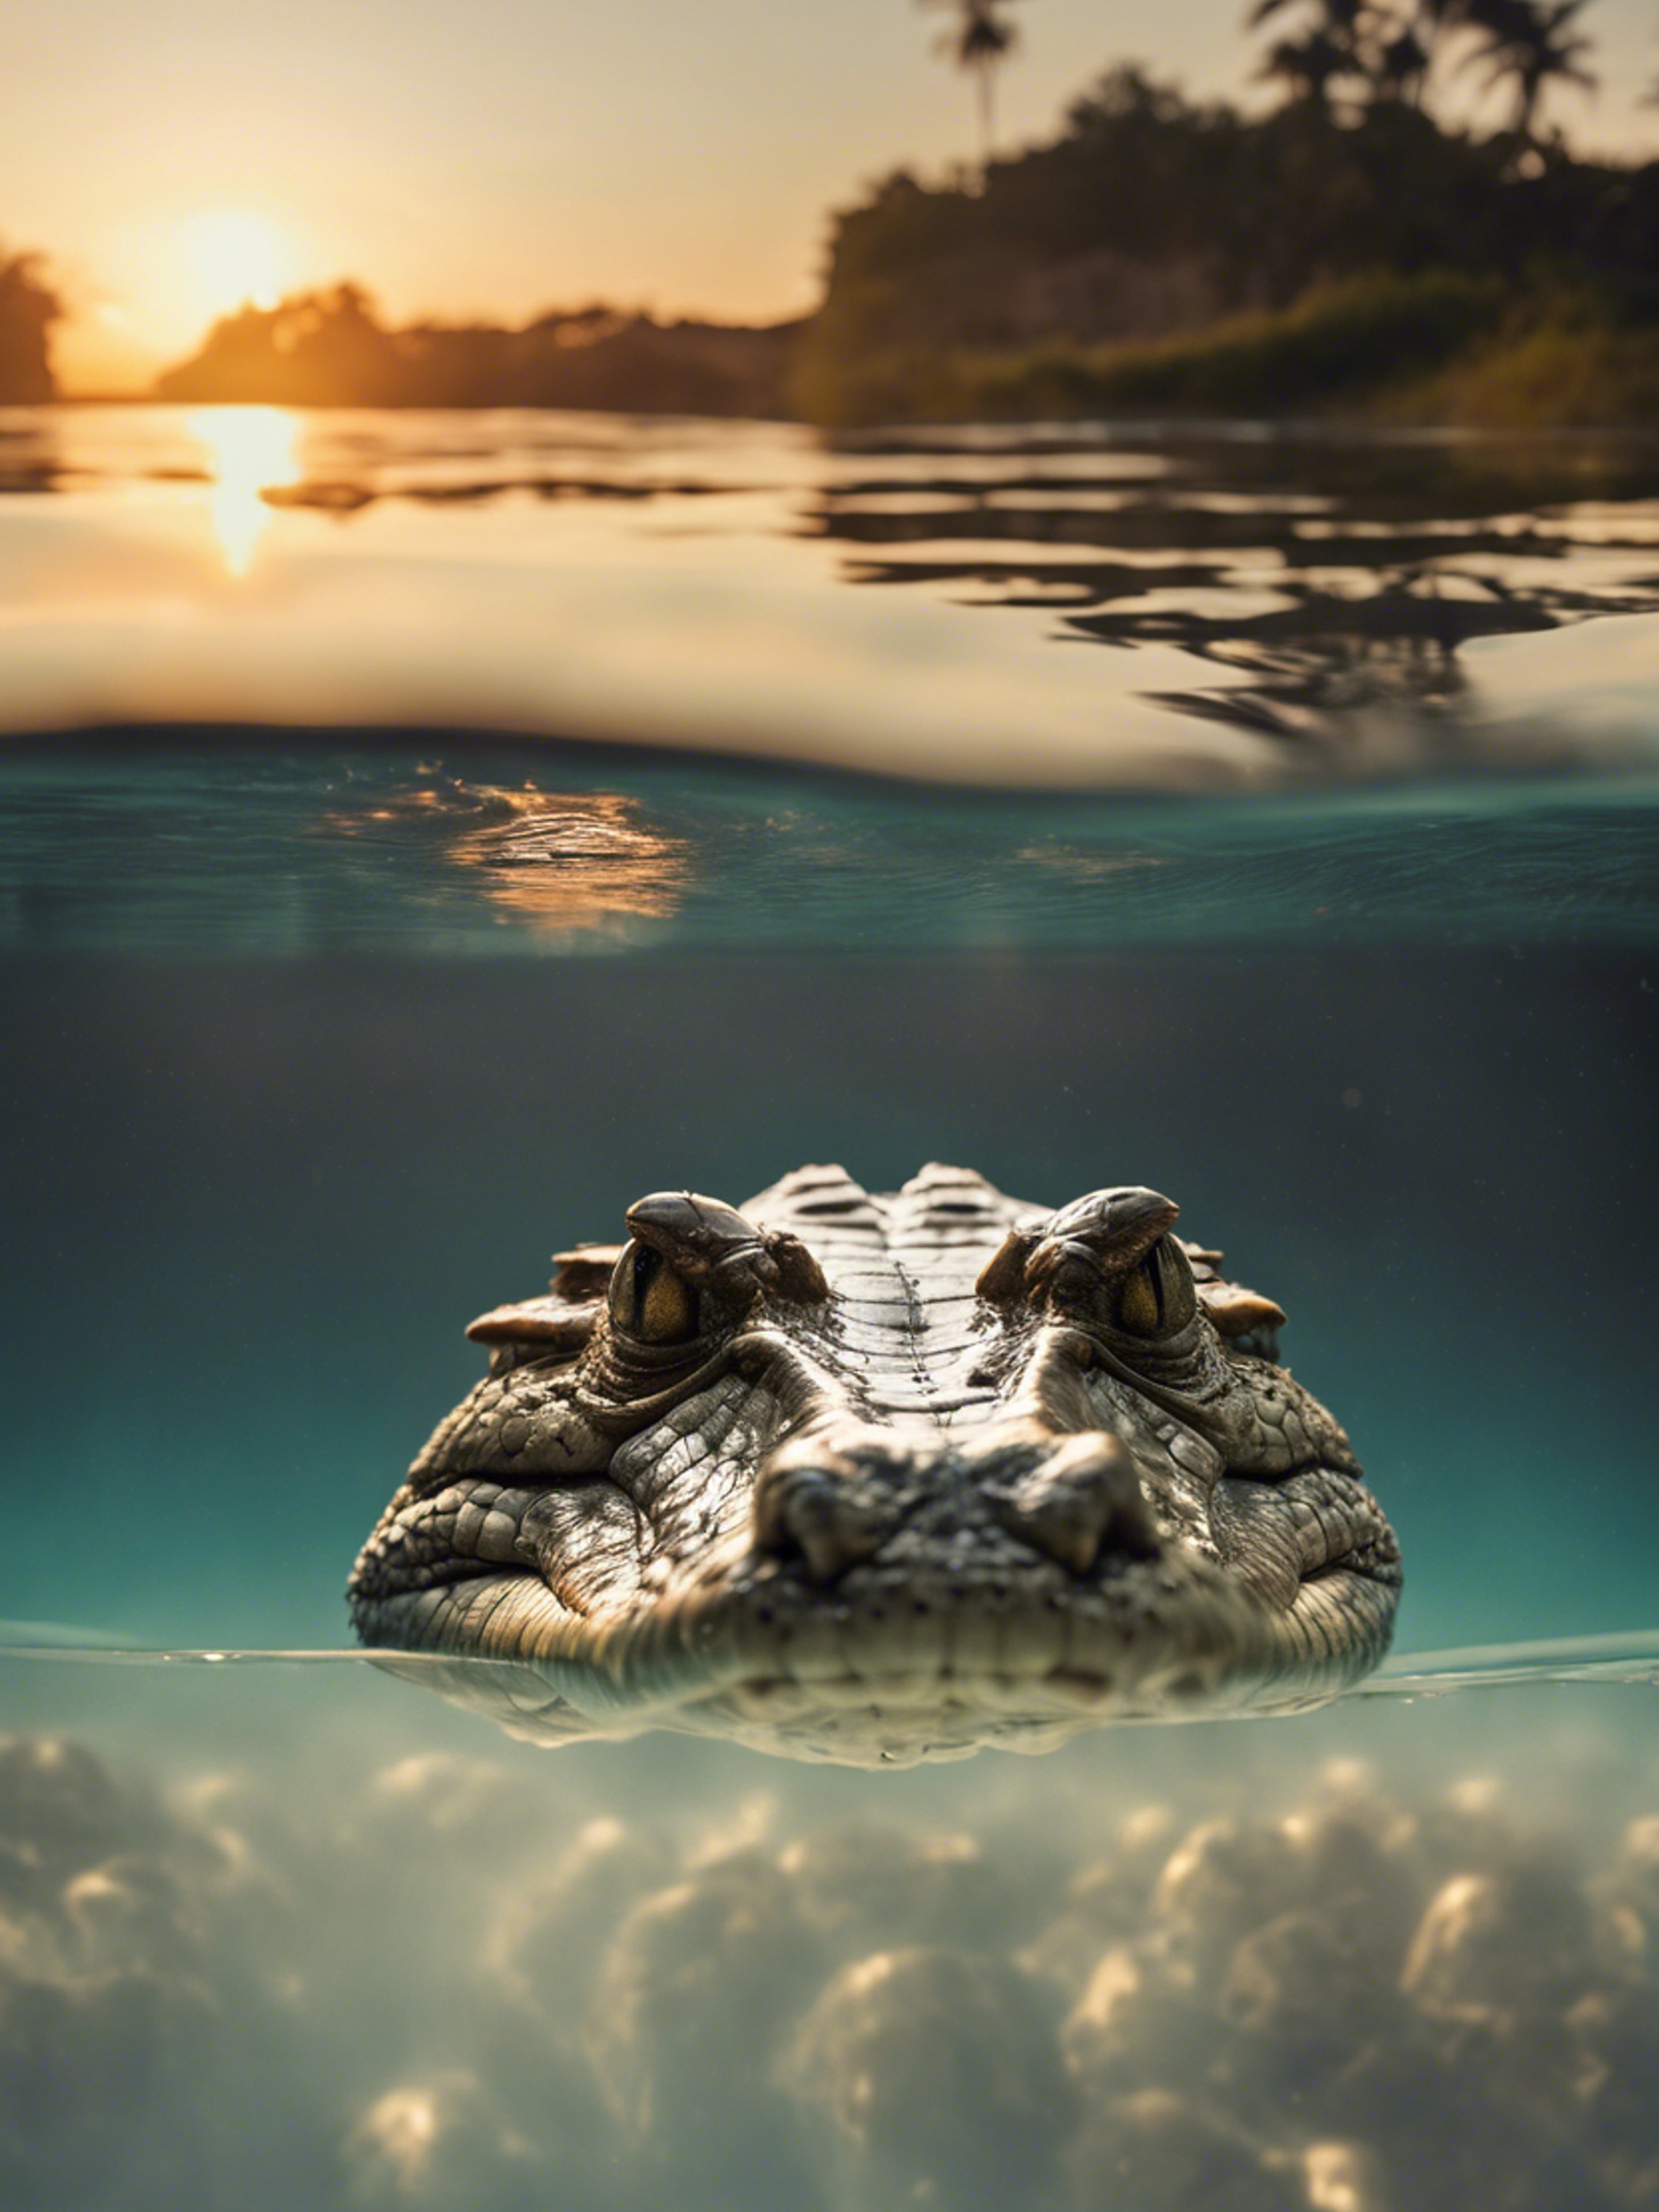 A split-view of a crocodile above and below water at sunset. Wallpaper[519c40baa3334ebf8373]